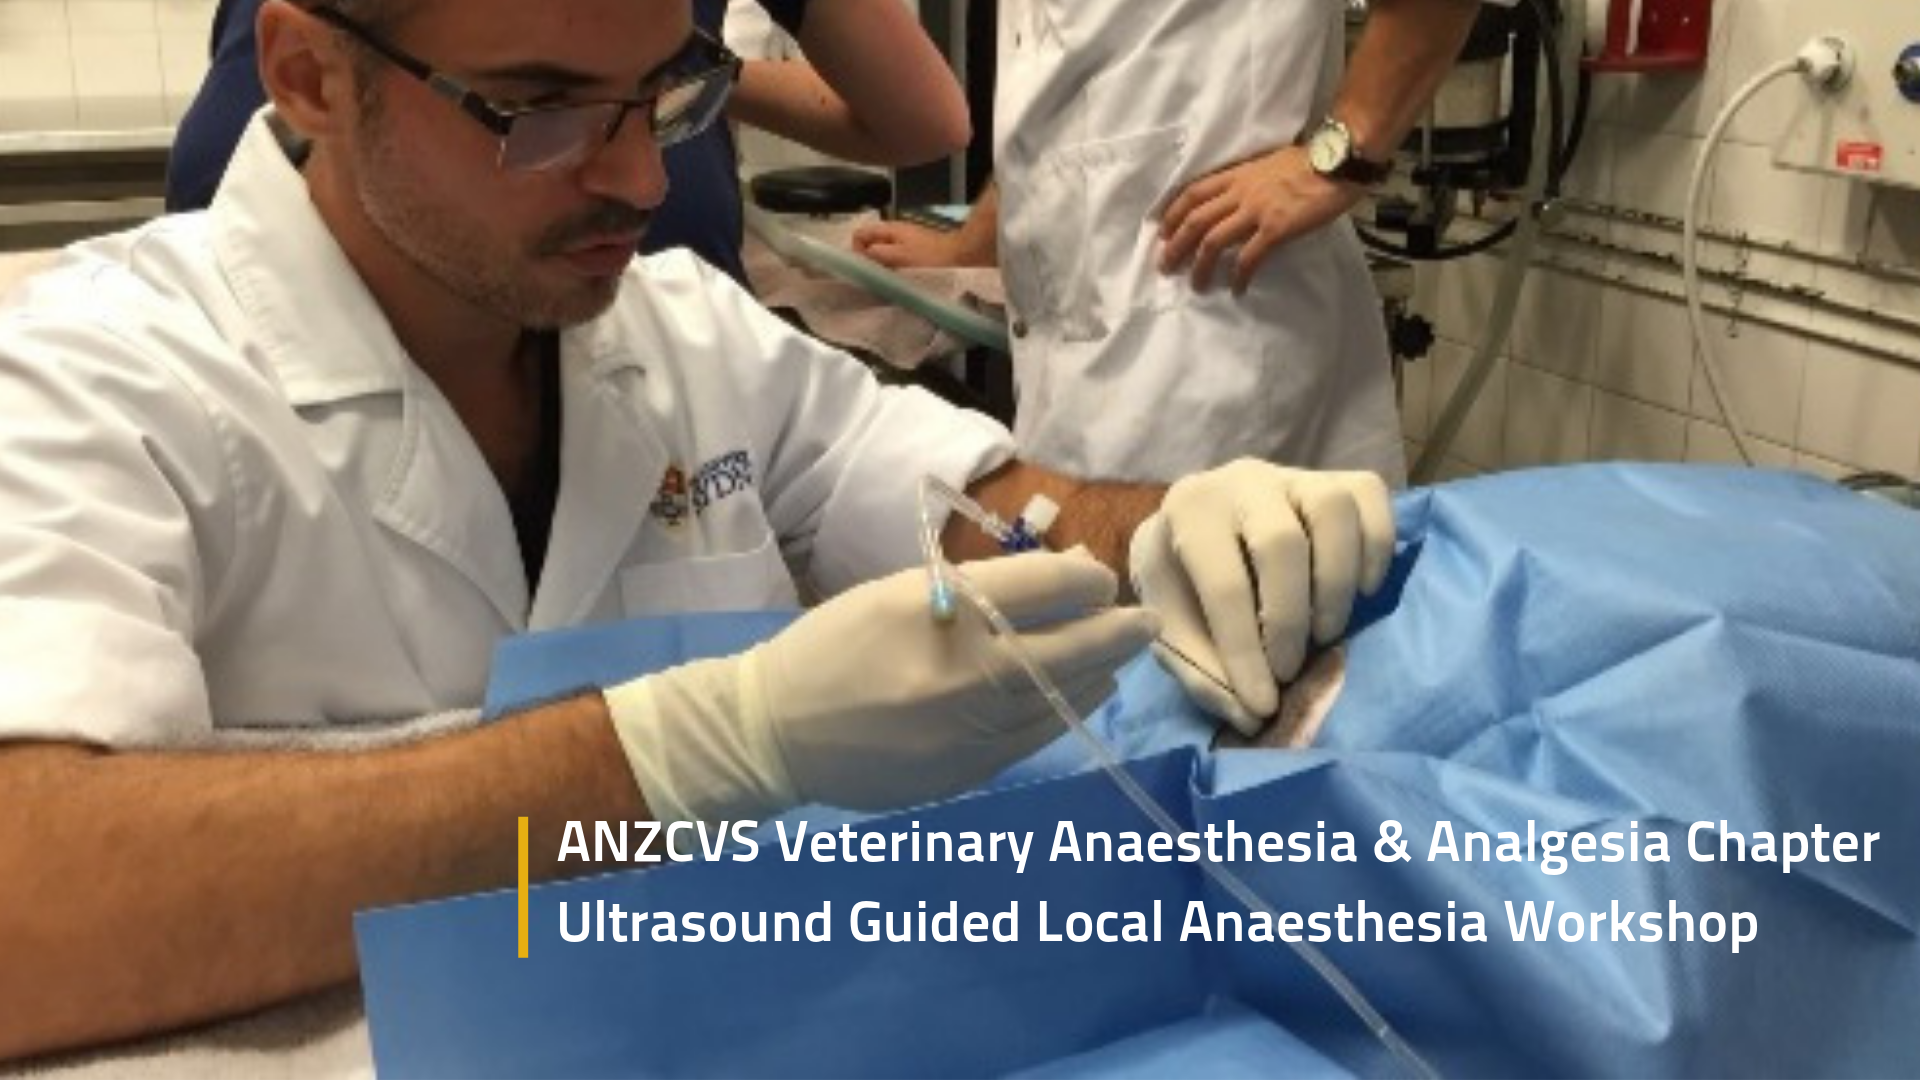 Ultrasound guided local anaesthesia workshop